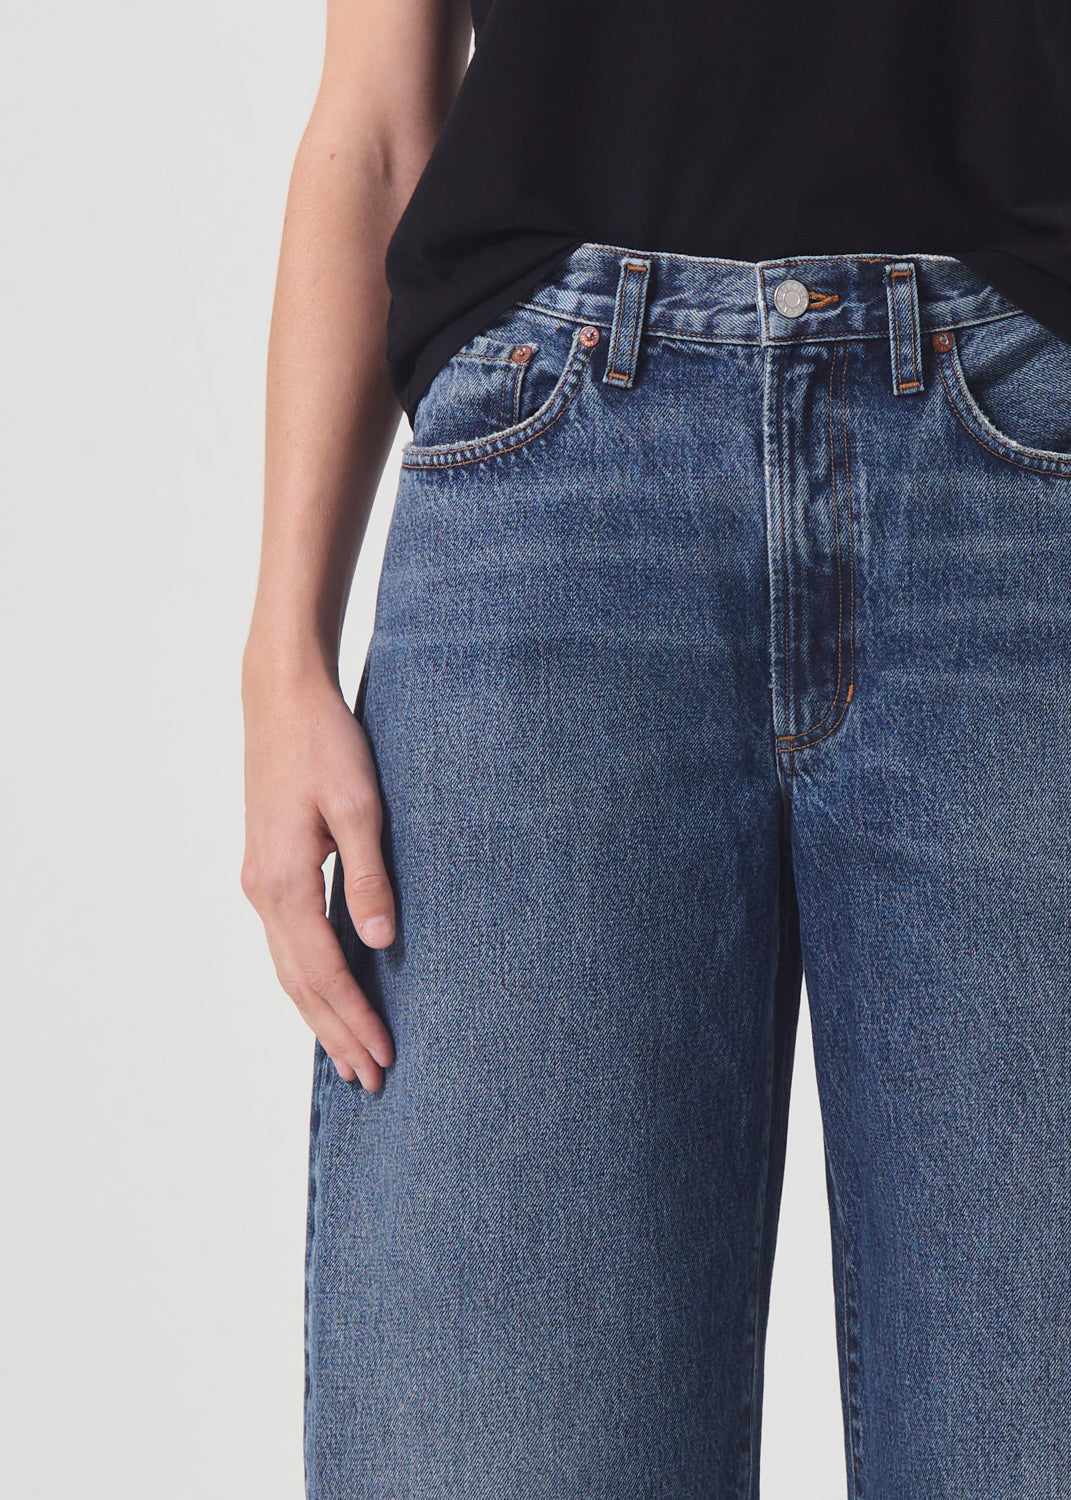 AGOLDE Balloon Ultra High Rise Curved Jean in Control